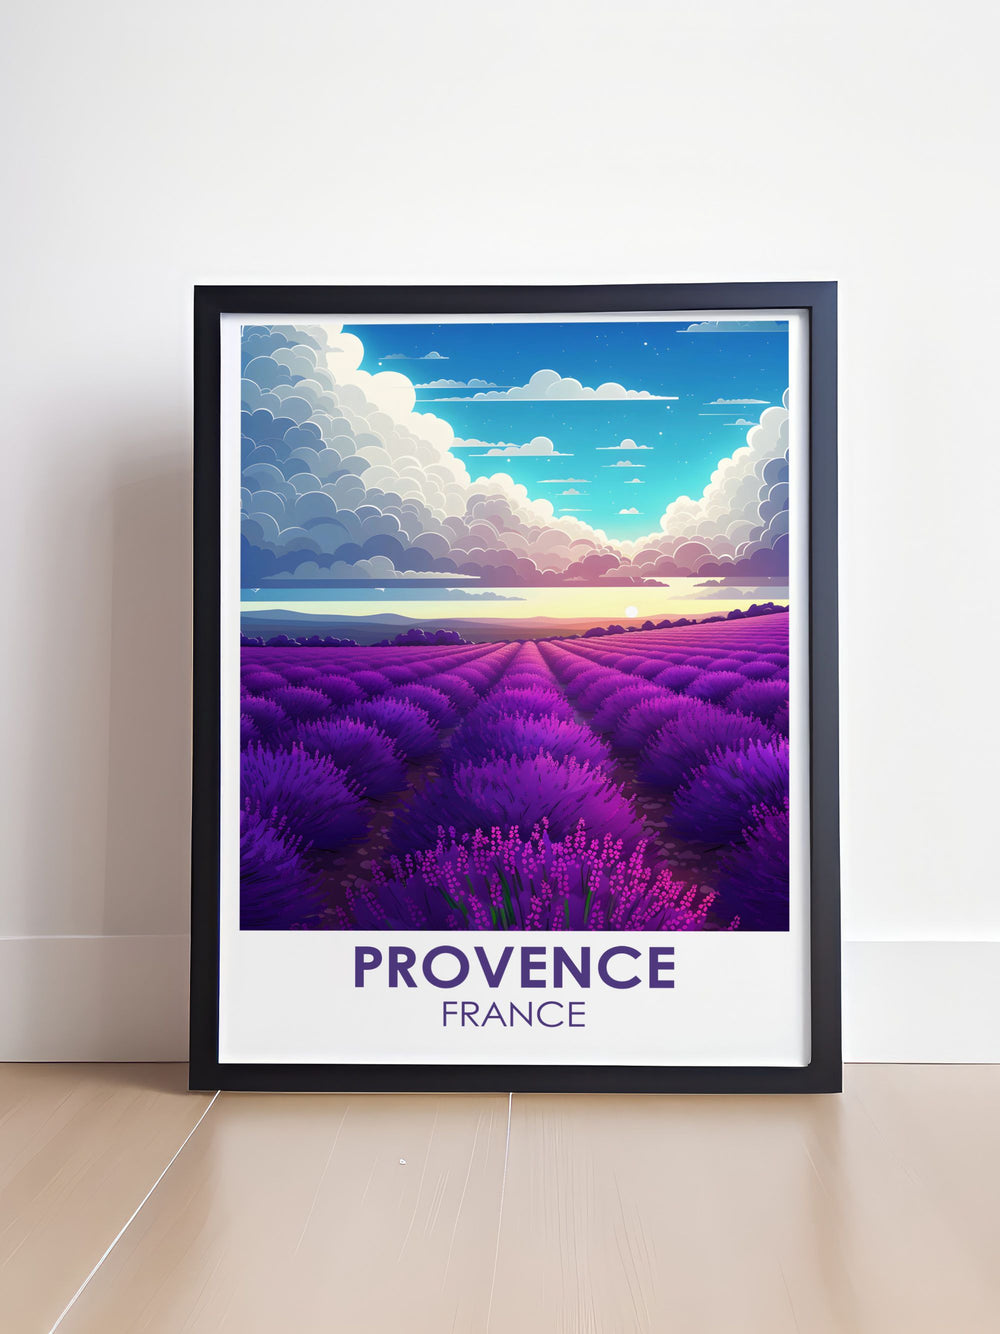 Delight in the enchanting vistas of the Lavender Fields of Valensole with this art print, capturing the lush rows of lavender against the scenic hills and clear skies of Provence.